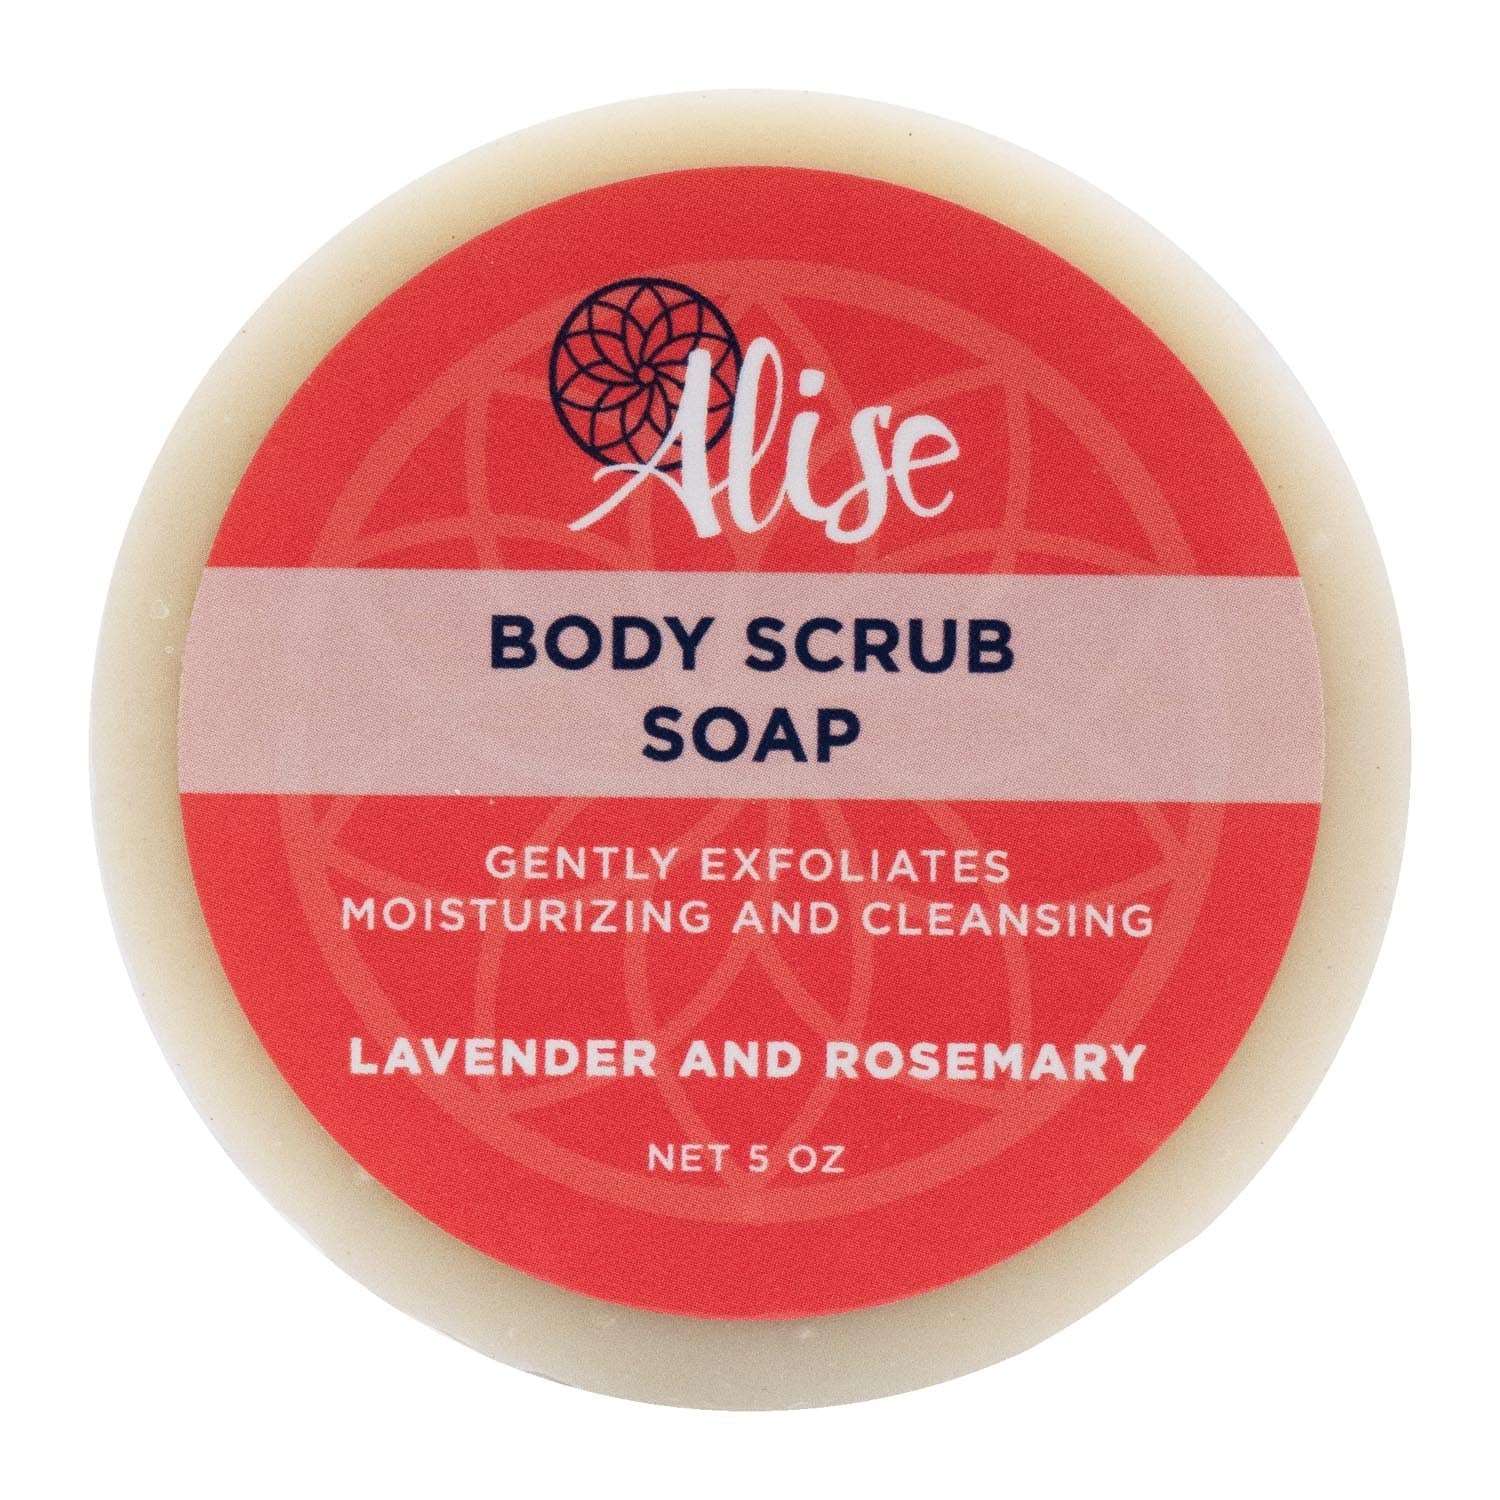 Body Scrub Soap 5oz handcrafted by Alise Body Care